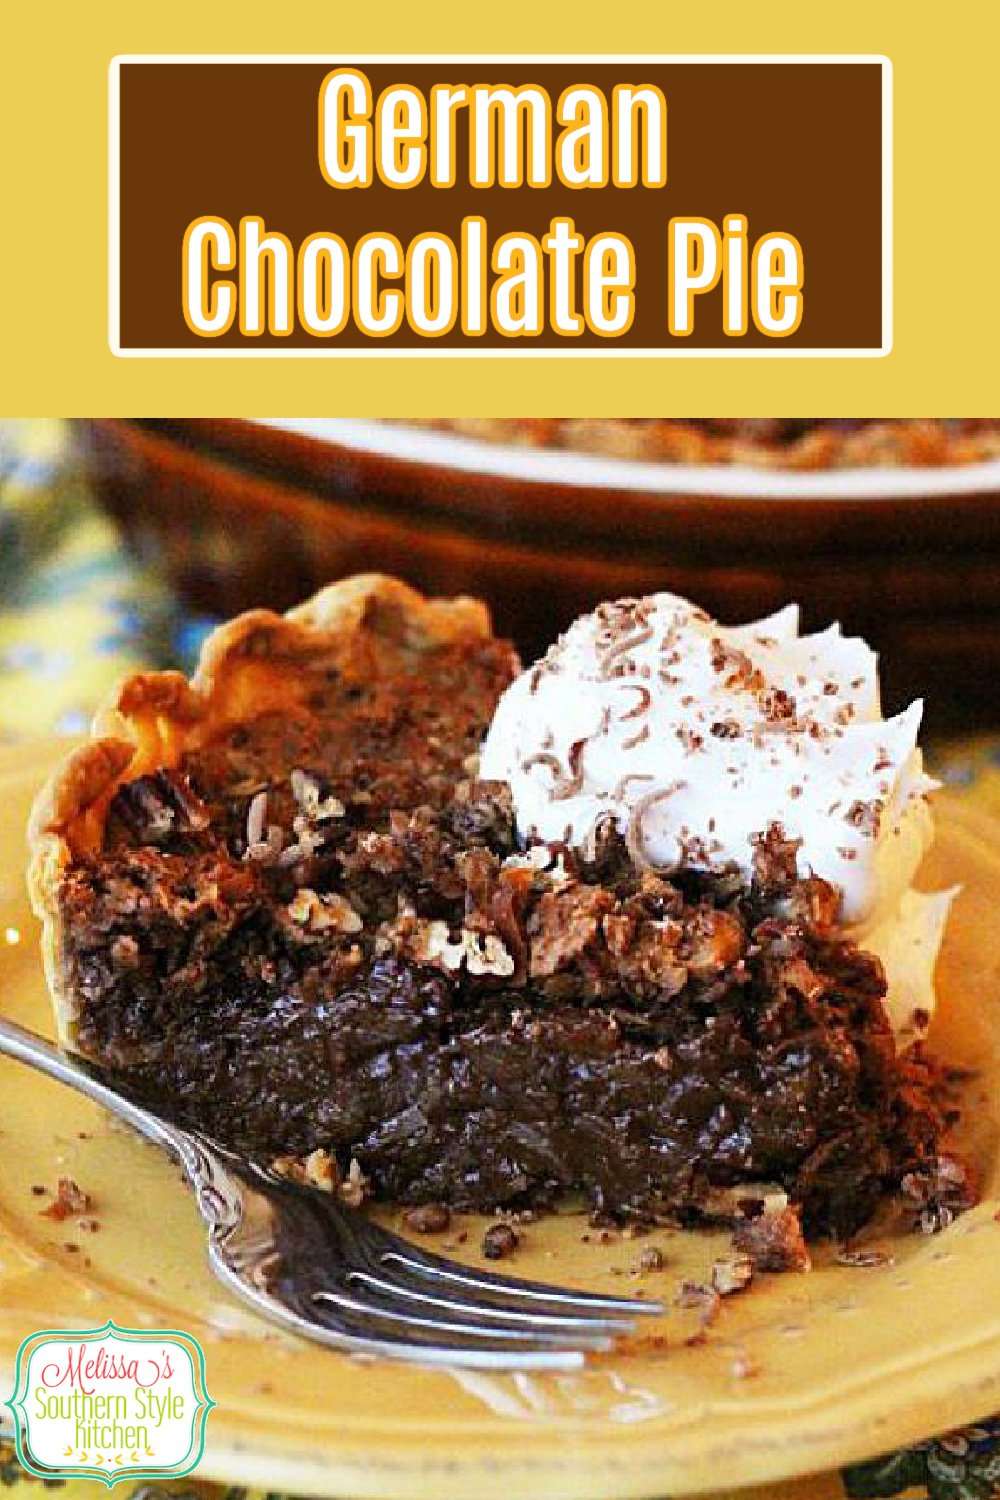 Prepare to fall in love with this German Chocolate Pie filled with velvety chocolate, shredded coconut and pecans #germanchocolatepie #chocolatepierecipes #germanchocolate #pie #desserts #dessertfoodrecipes #southernrecipes via @melissasssk